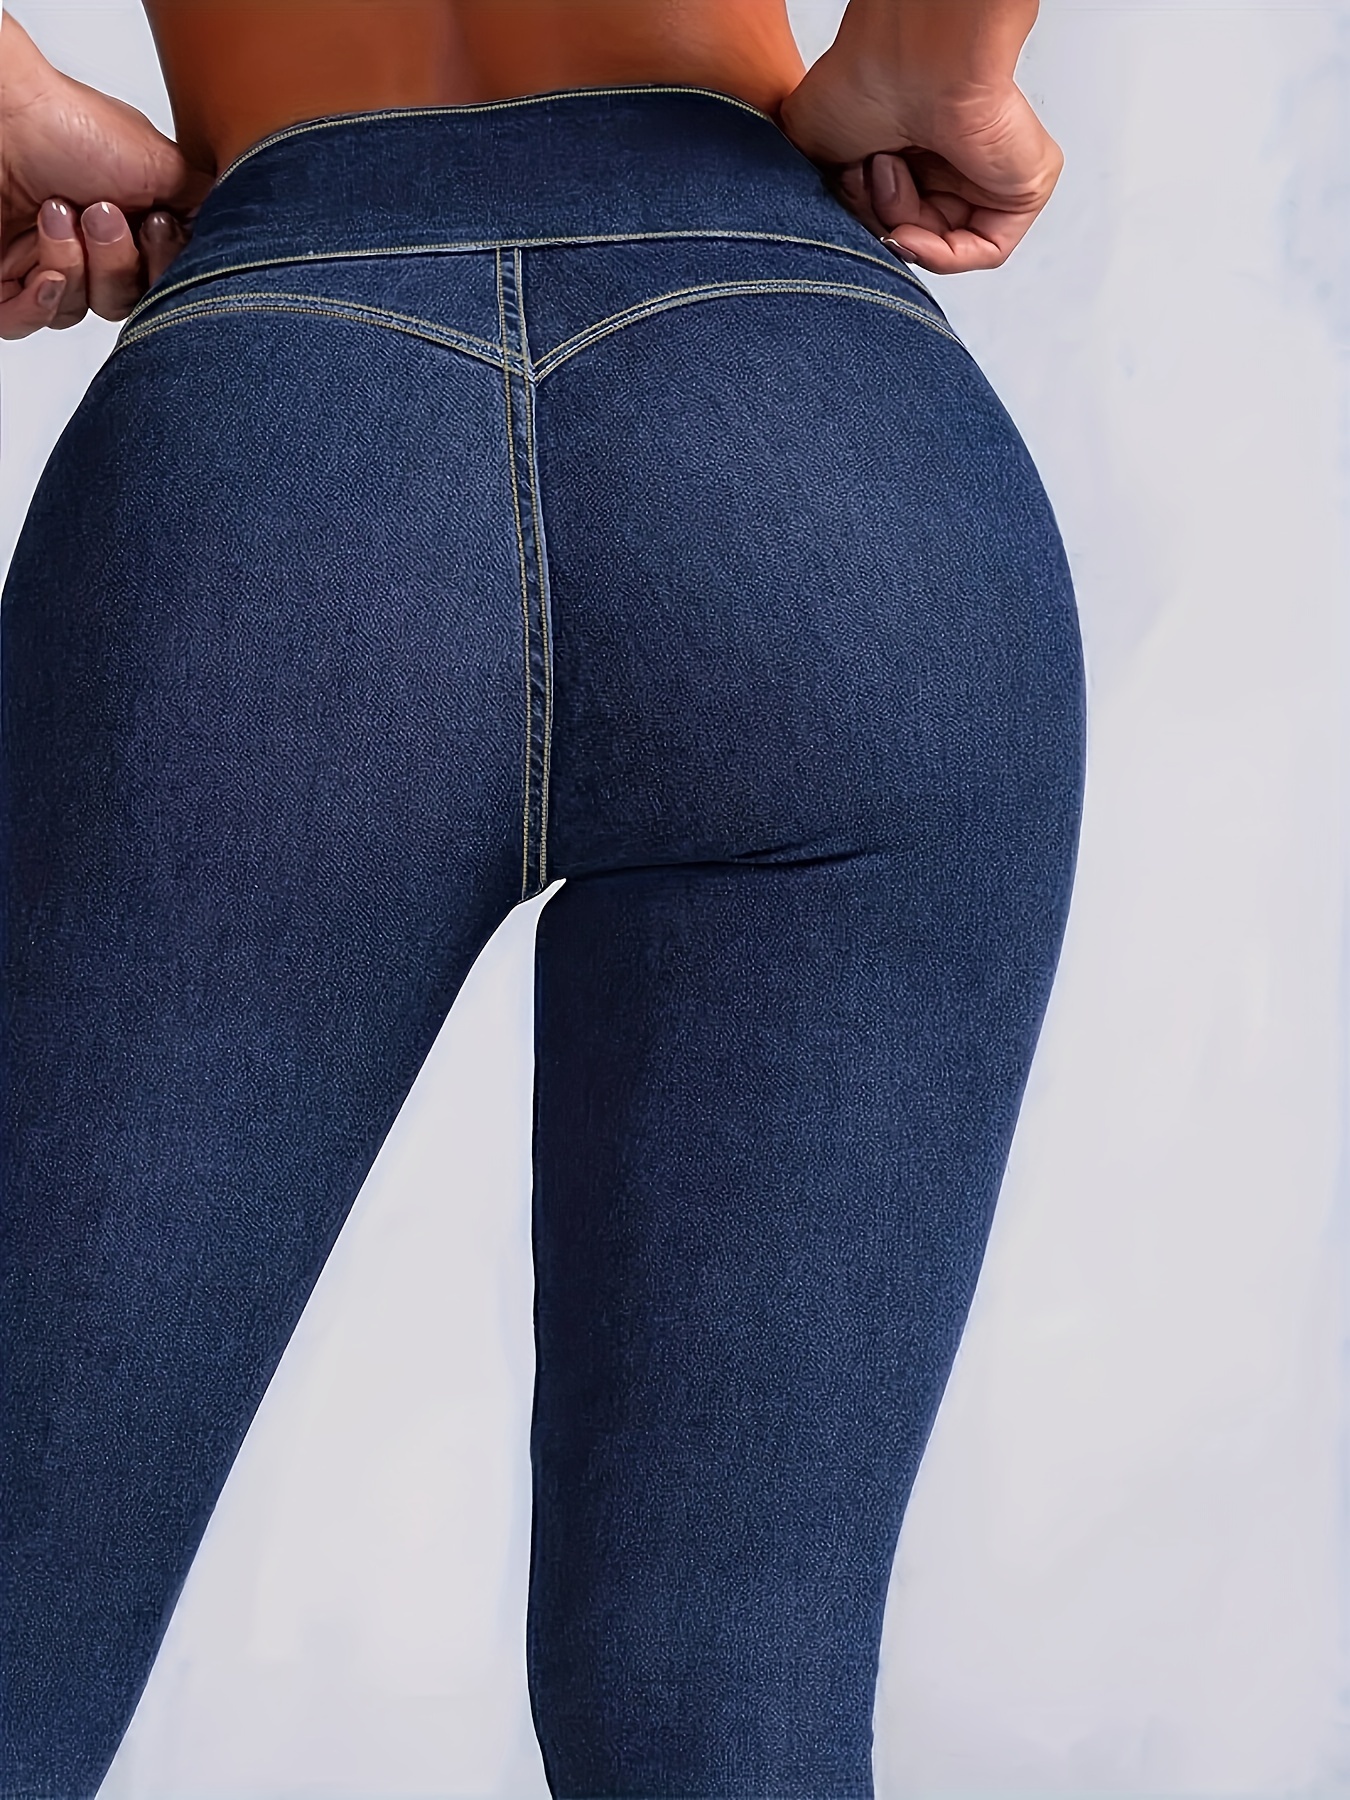 Women Push-Up Butt Lifting High Waist Stretchy Skinny Jeans Casual Denim  Pants Ladies Zipper Button Jegging Pencil Pants